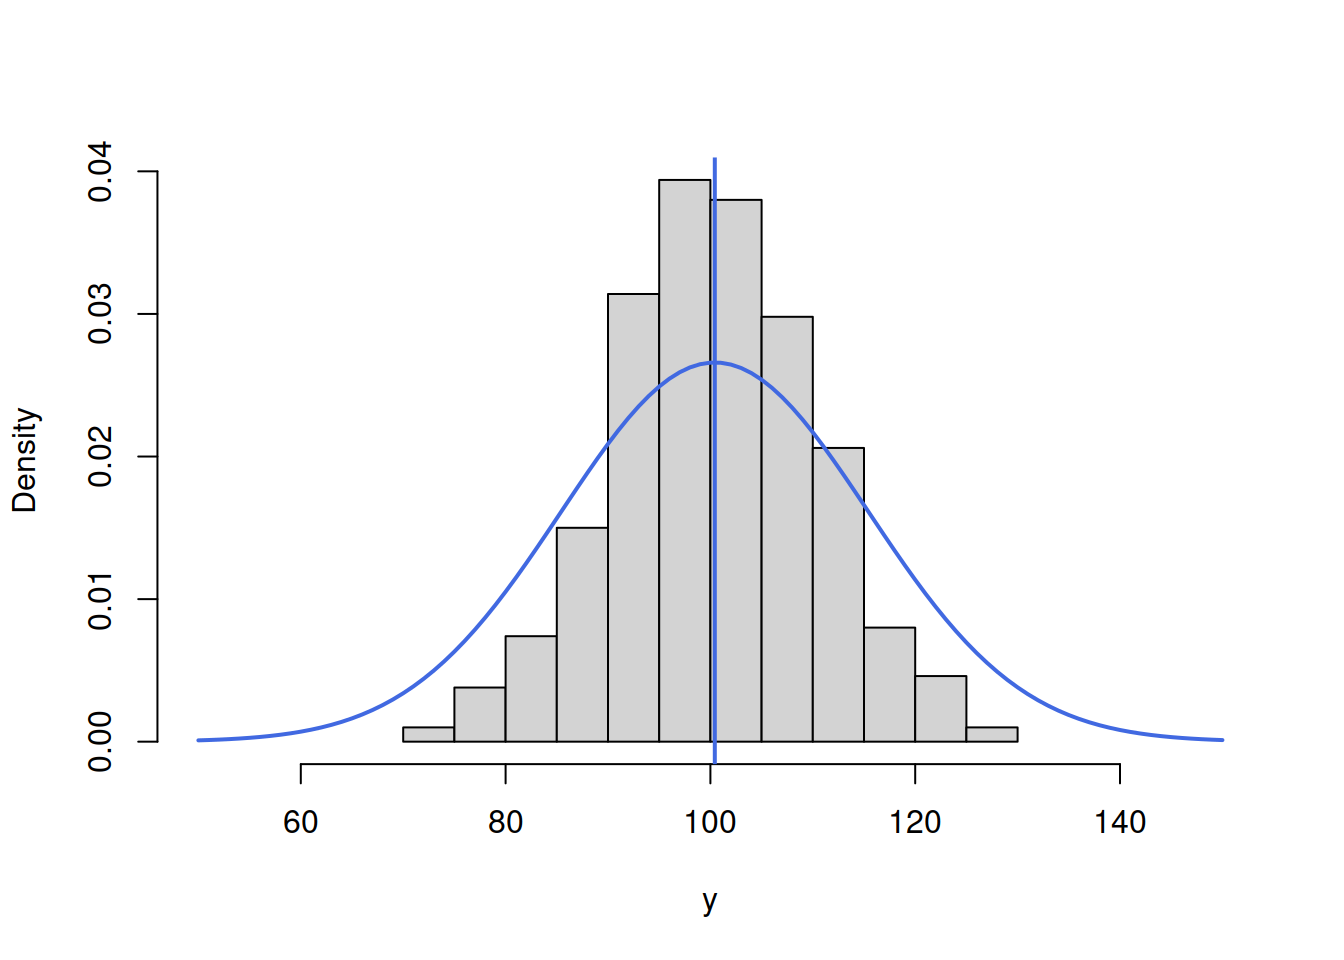 ML example with Normal curve and $\hat{\mu}_y=\bar{y}$ and $\hat{\sigma}=15$